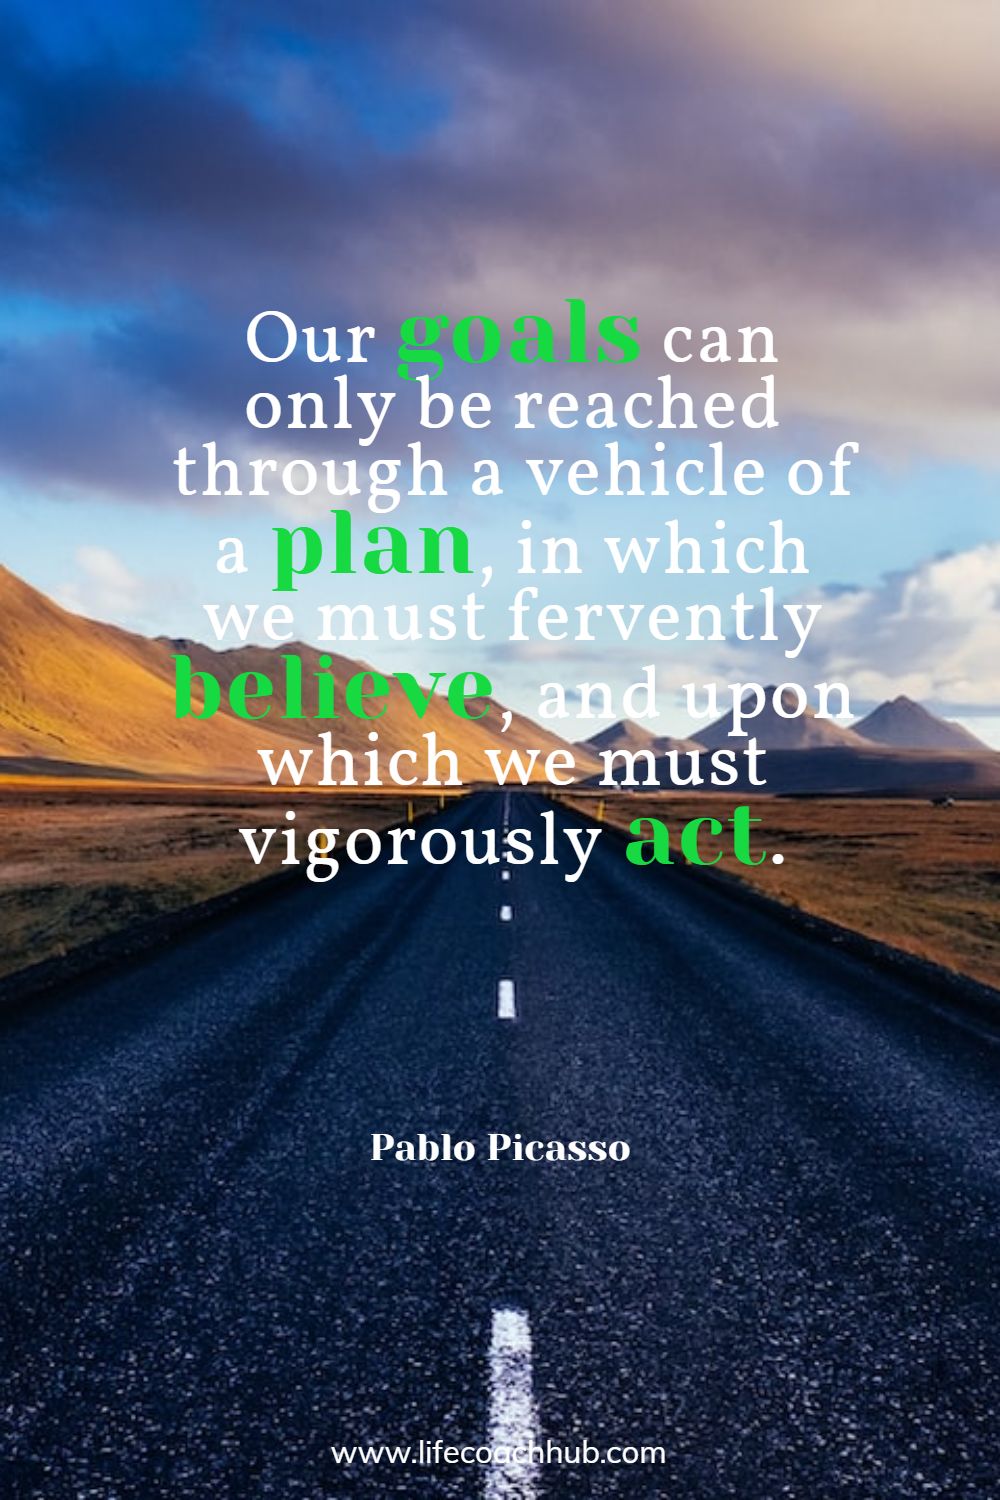 Our goals can only be reached through a vehicle of a plan, in which we must fervently believe, and upon which we must vigorously act. Pablo Picasso Coaching Quote